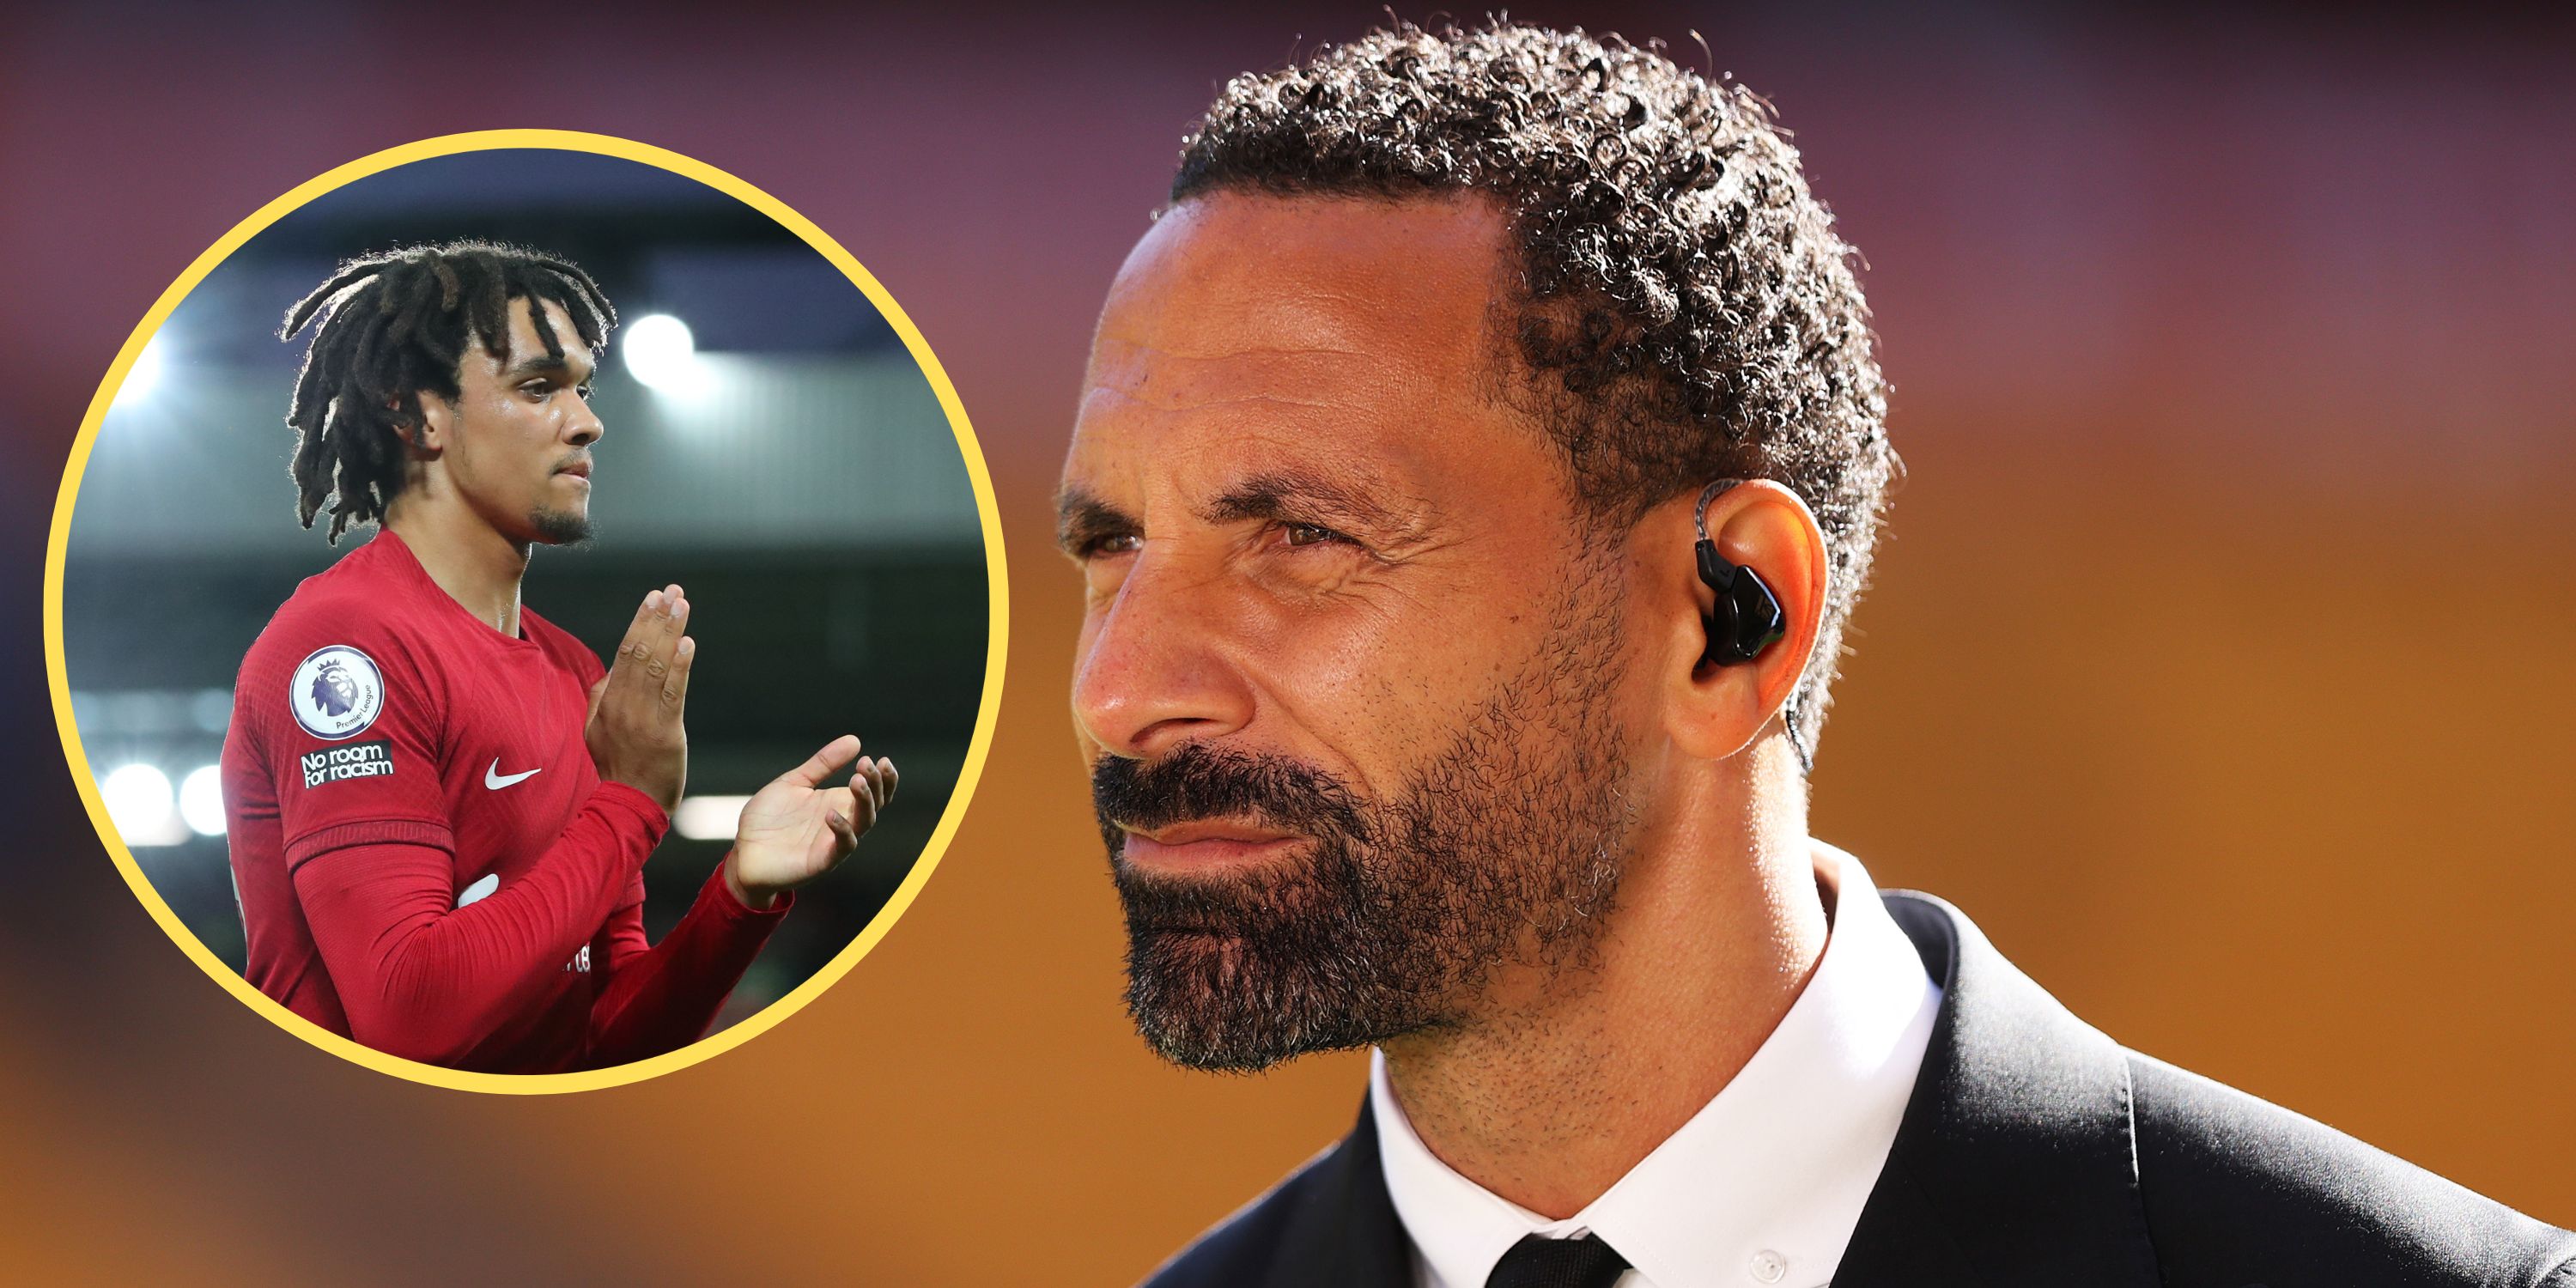 ‘Are you winding me up?’ – Ferdinand brands France legend a hypocrite for ‘disrespectful’ Trent comments